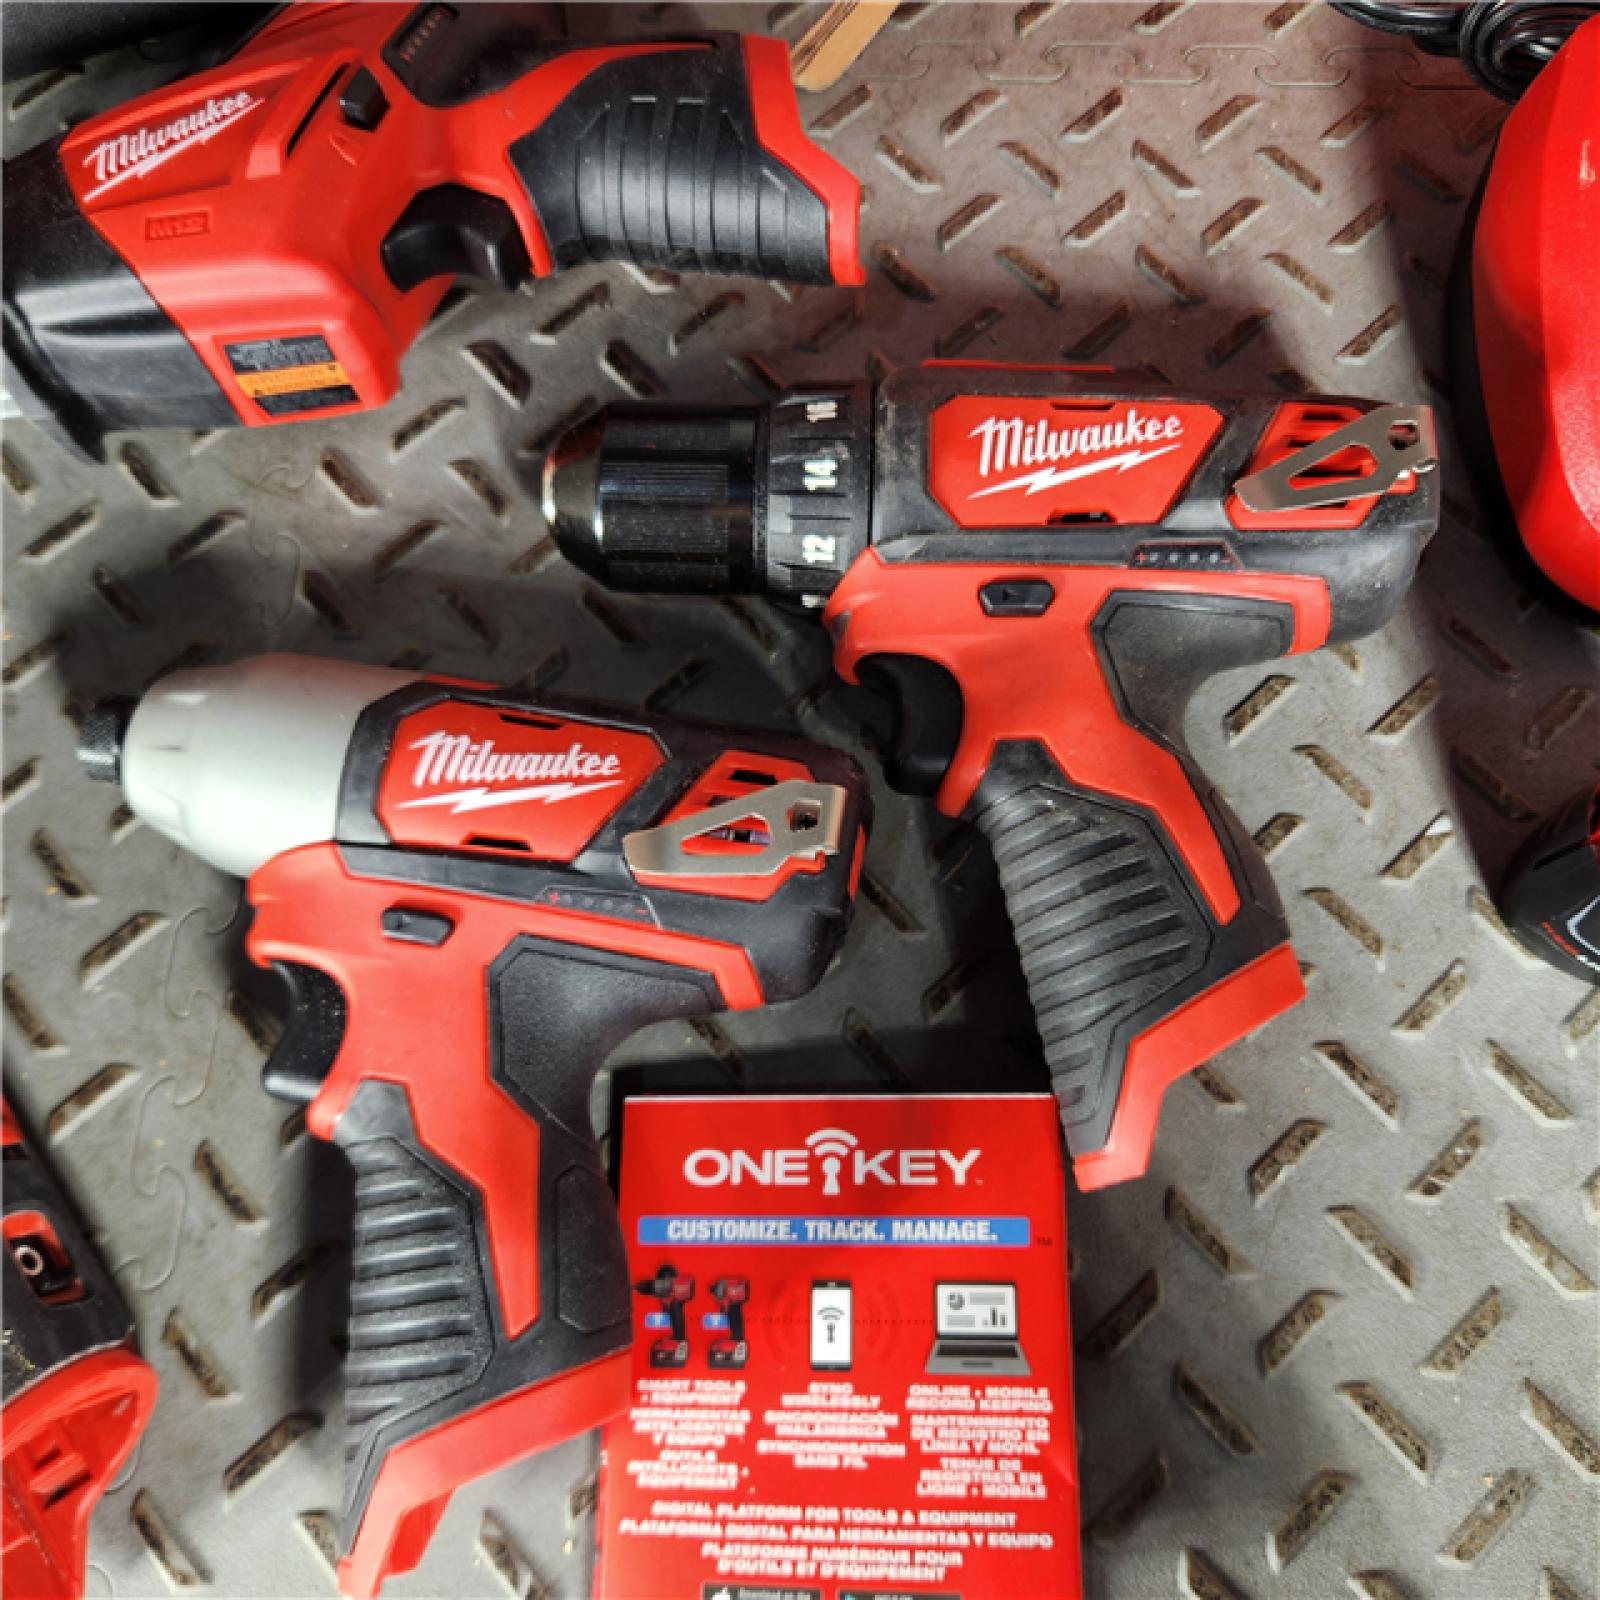 Houston Location - AS-IS Milwaukee 2497-24H 4 Tool Combo Kit M12 Li-Ion Cordless W/ 2 Batteries - Appears IN GOOD Condition